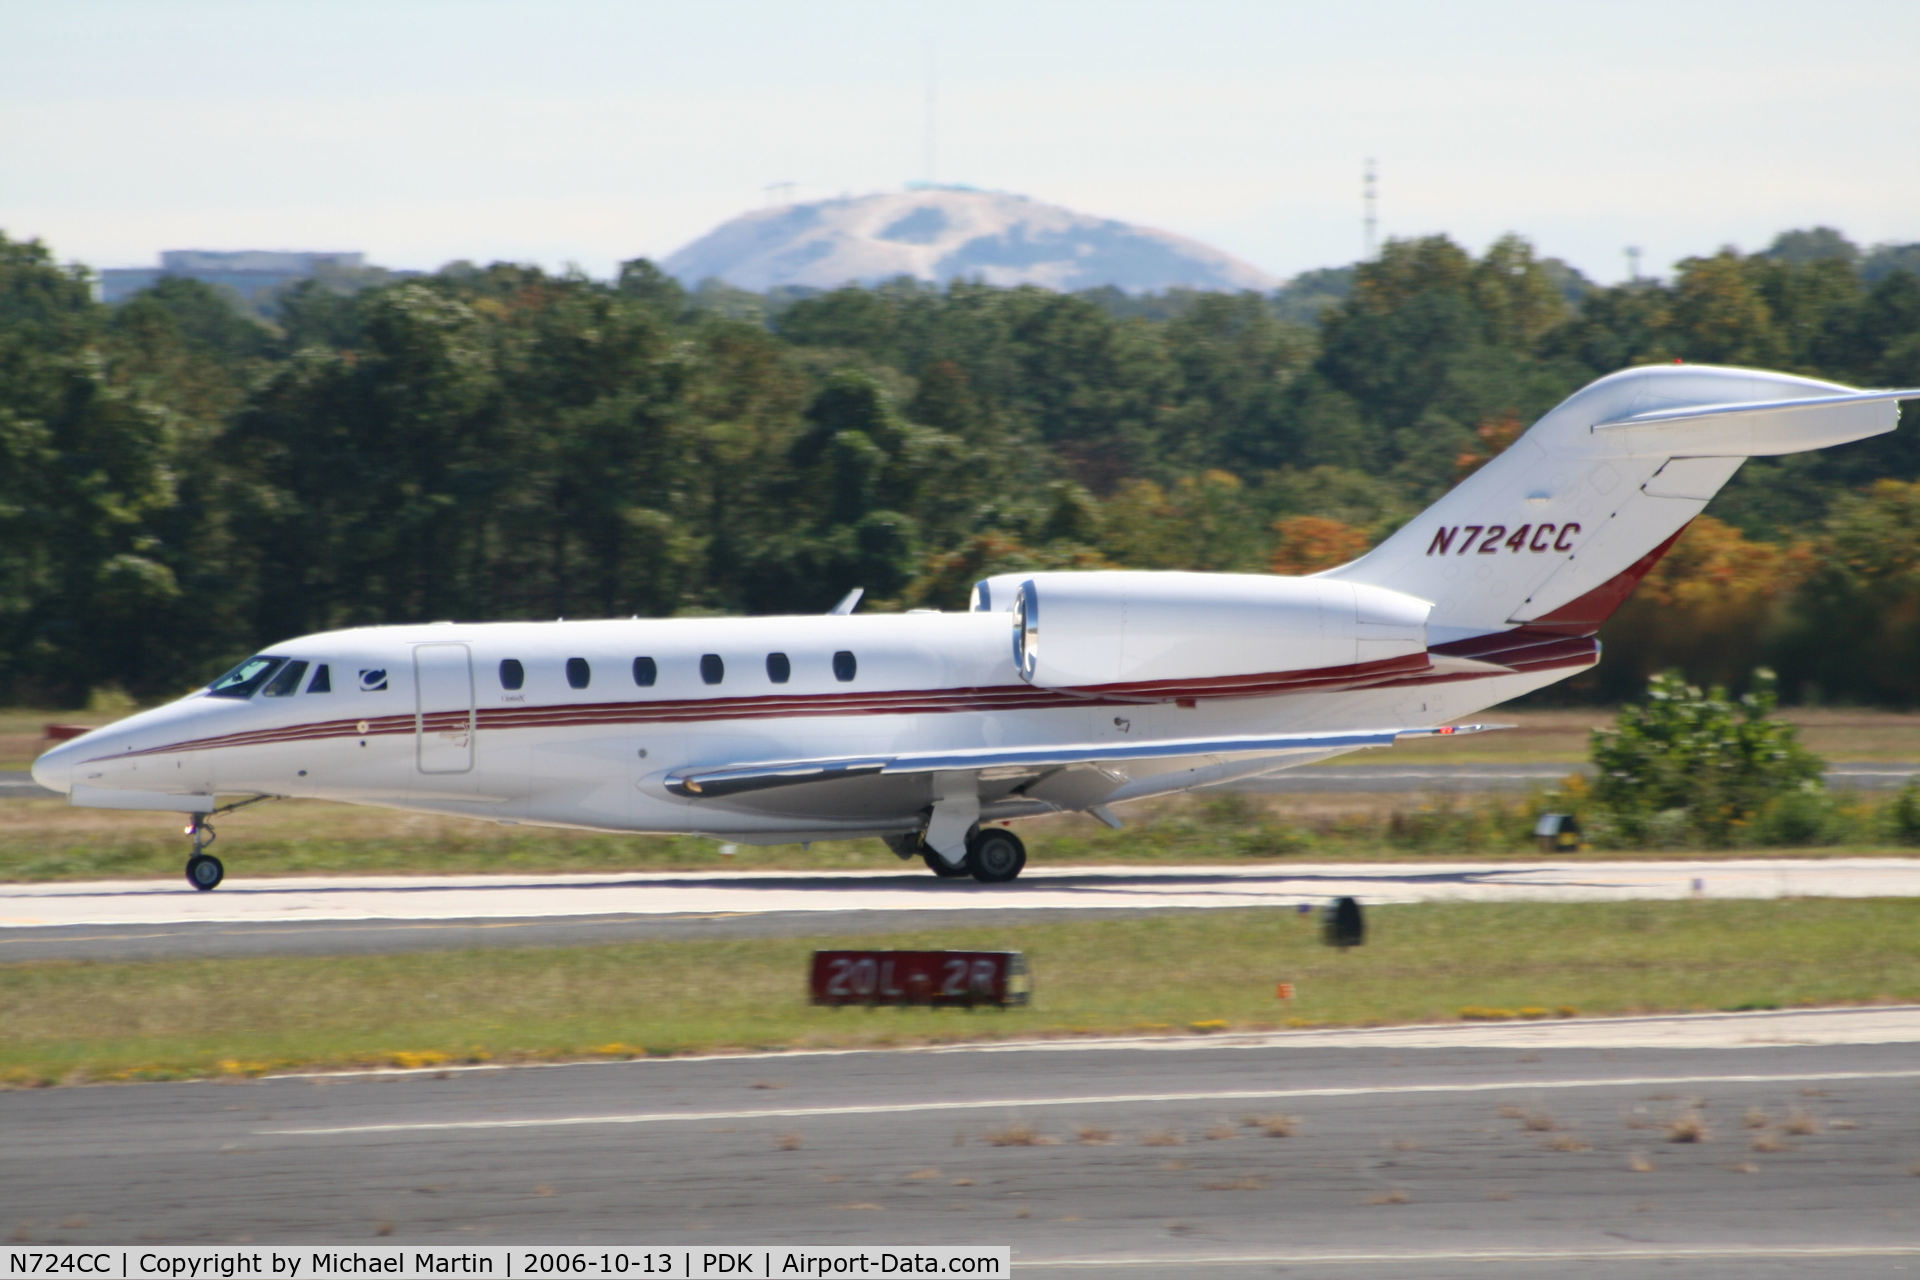 N724CC, 1998 Cessna 750 Citation X Citation X C/N 750-0062, Clear Channel departing for parts unknown